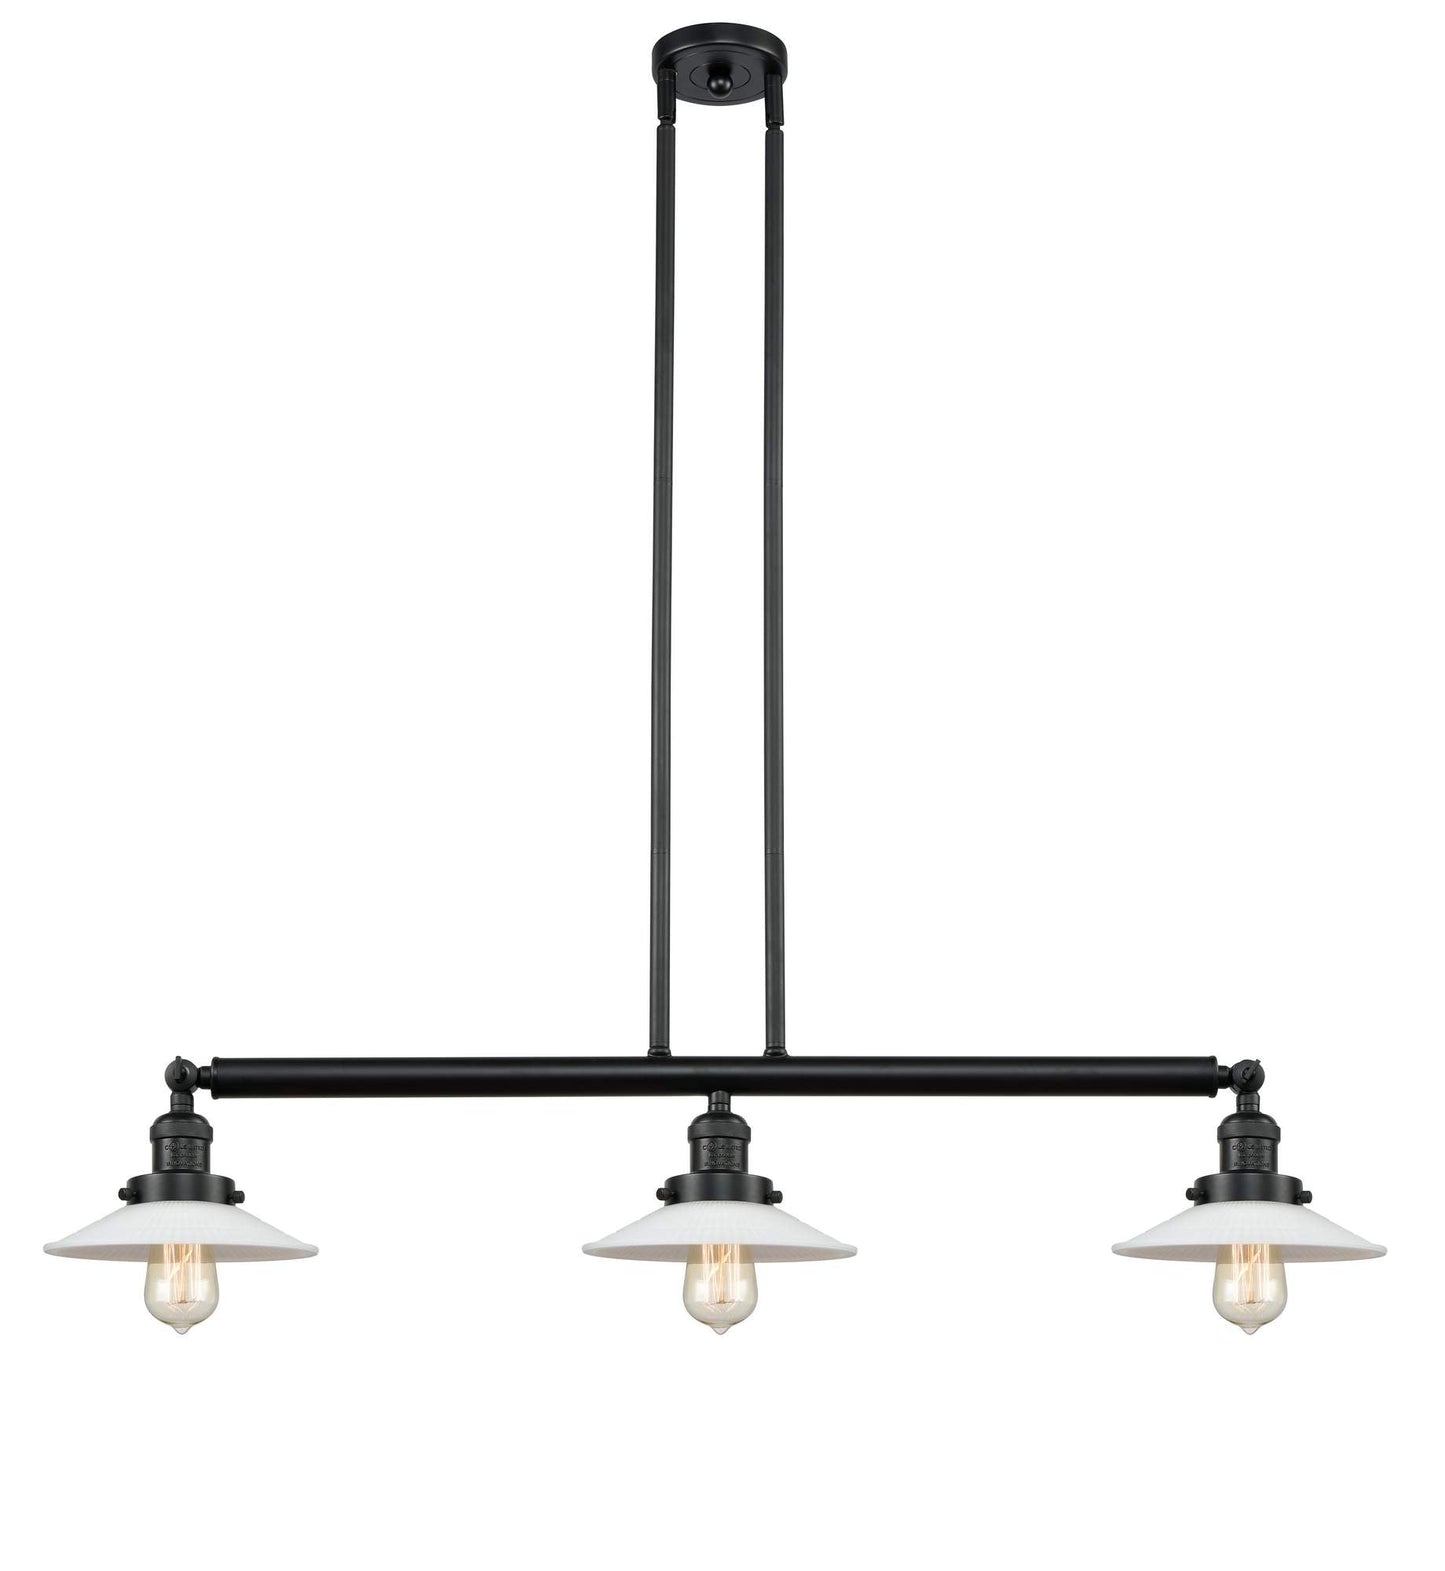 213-BK-G1 3-Light 41" Matte Black Island Light - White Halophane Glass - LED Bulb - Dimmensions: 41 x 8.5 x 8<br>Minimum Height : 16.25<br>Maximum Height : 40.25 - Sloped Ceiling Compatible: Yes